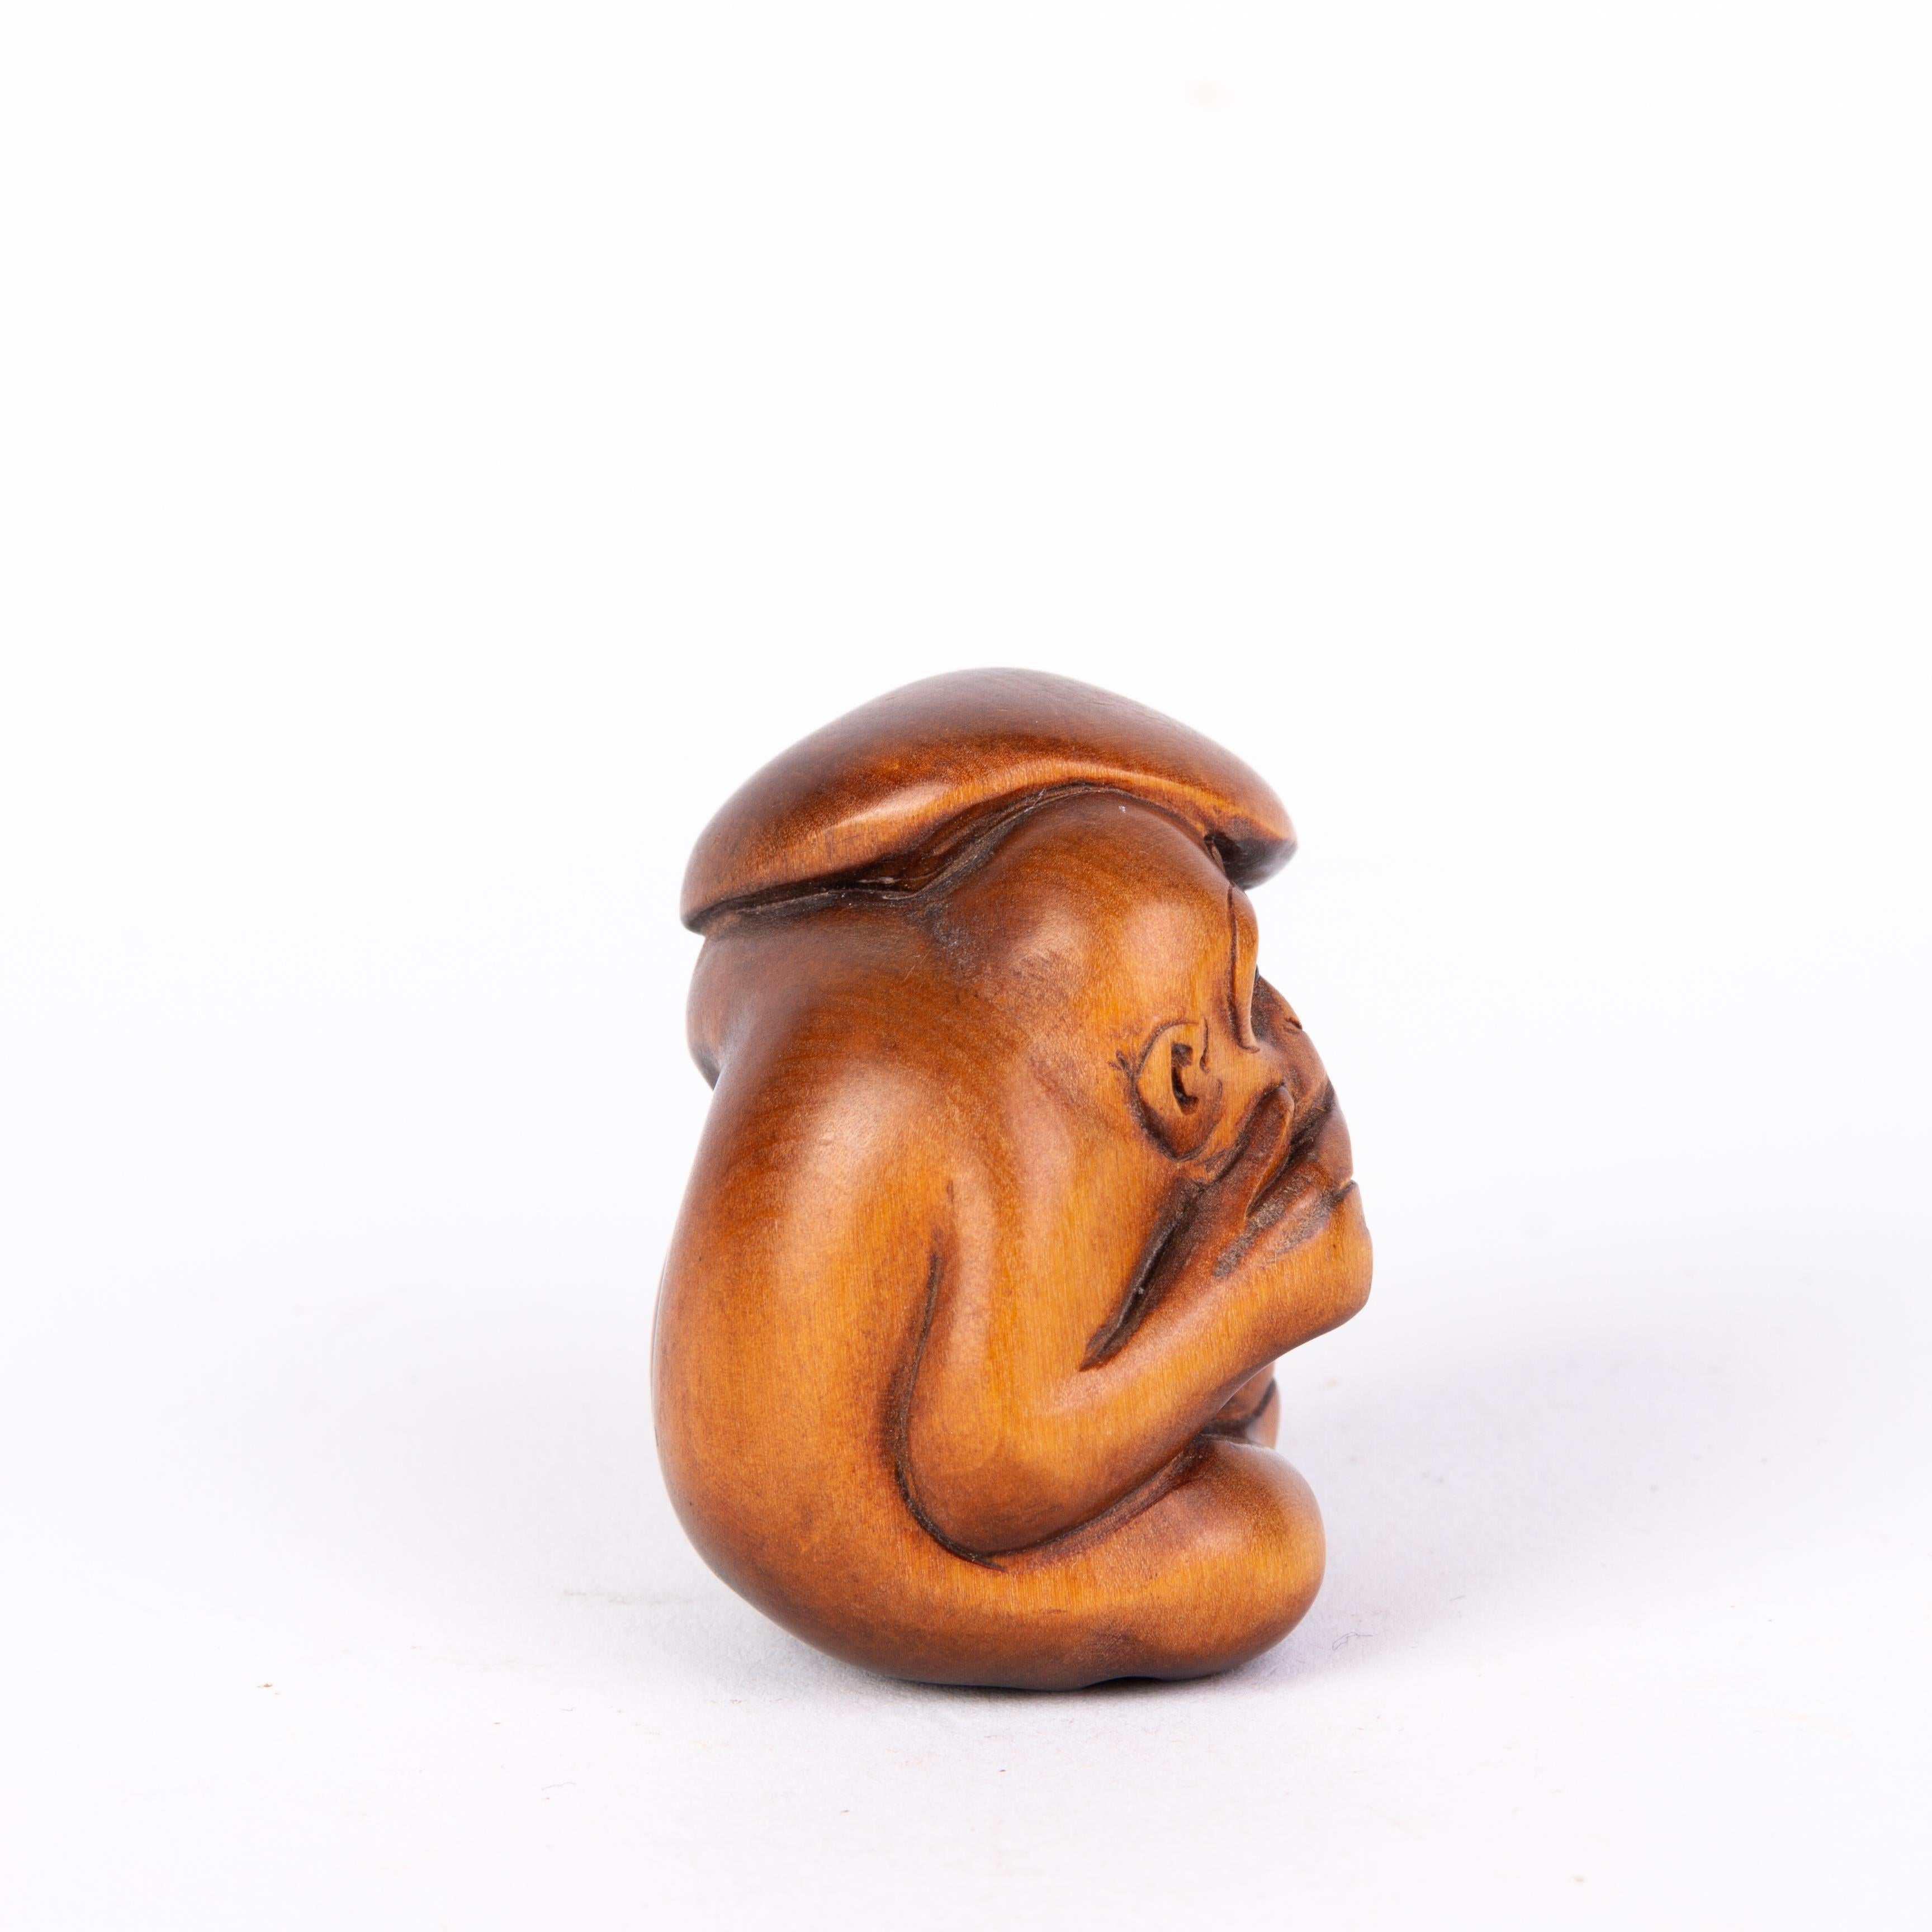 Japanese Carved boxwood Netsuke Inro Ojime
Very good condition.
From a private collection.
Free international shipping.